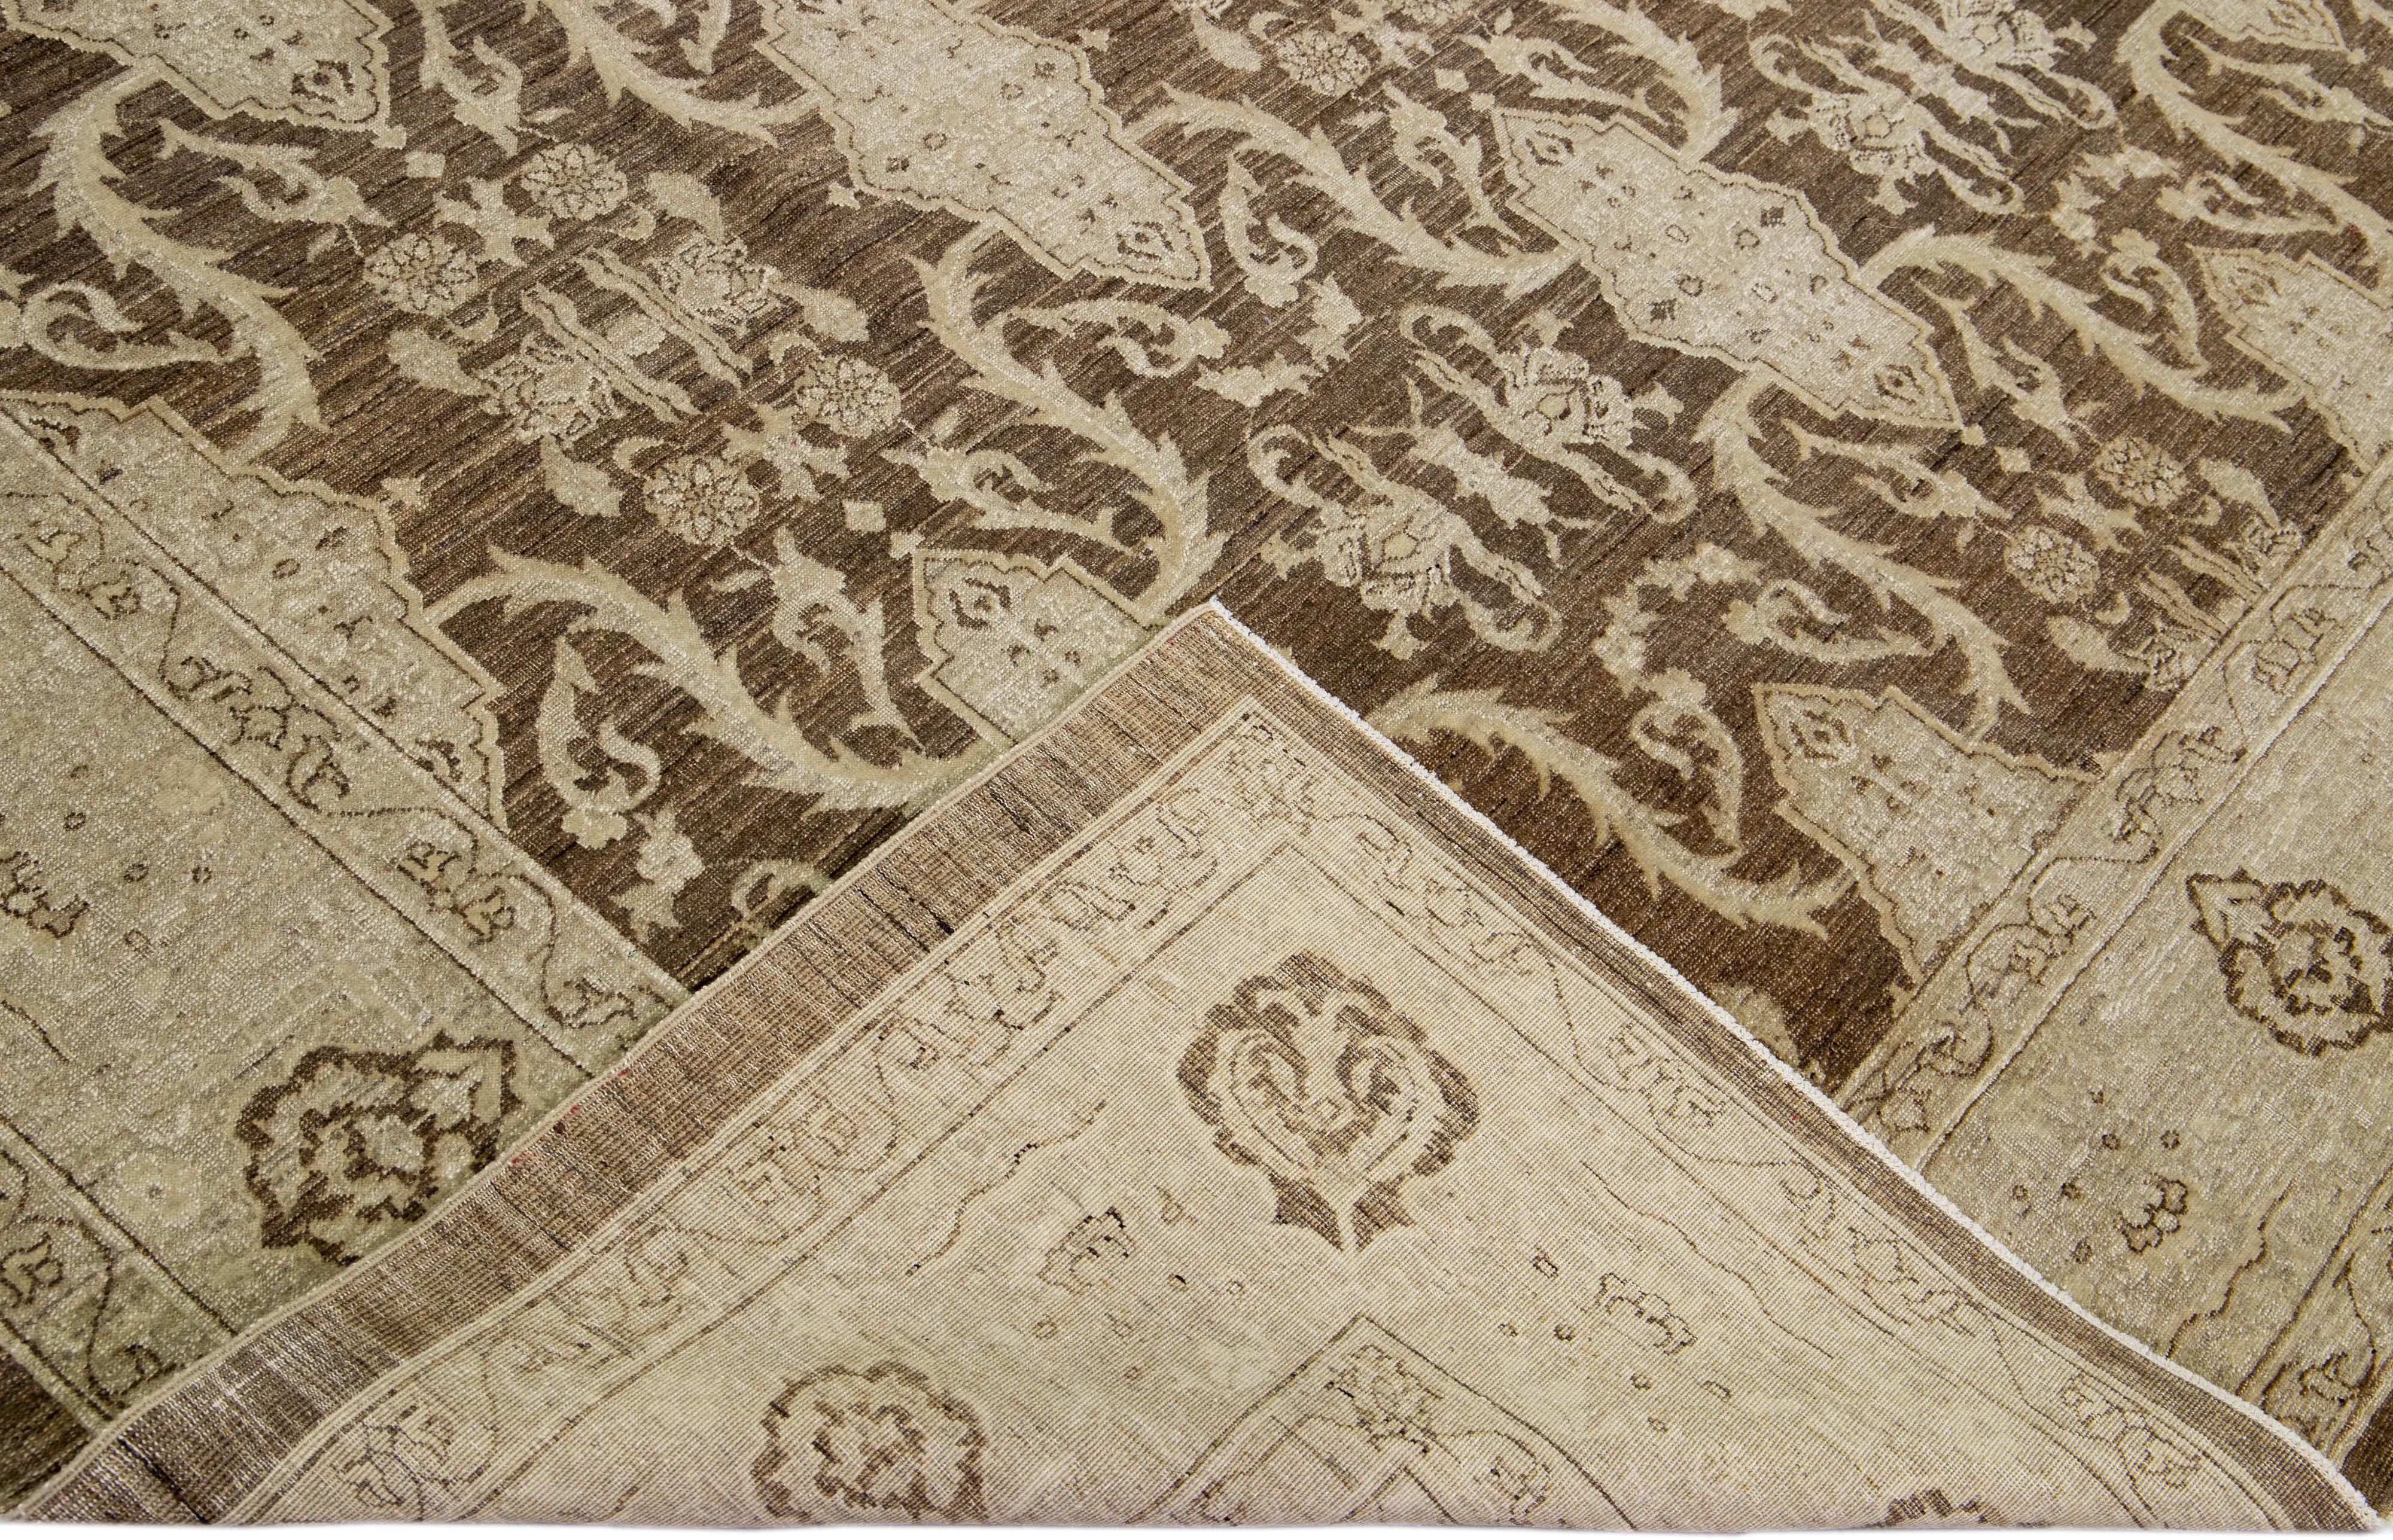 Beautiful hand-knotted antique Peshawar wool rug with the brown field. This Persian rug has a beige frame and accents featuring an all-over traditional floral design. 

This rug measures 8'8